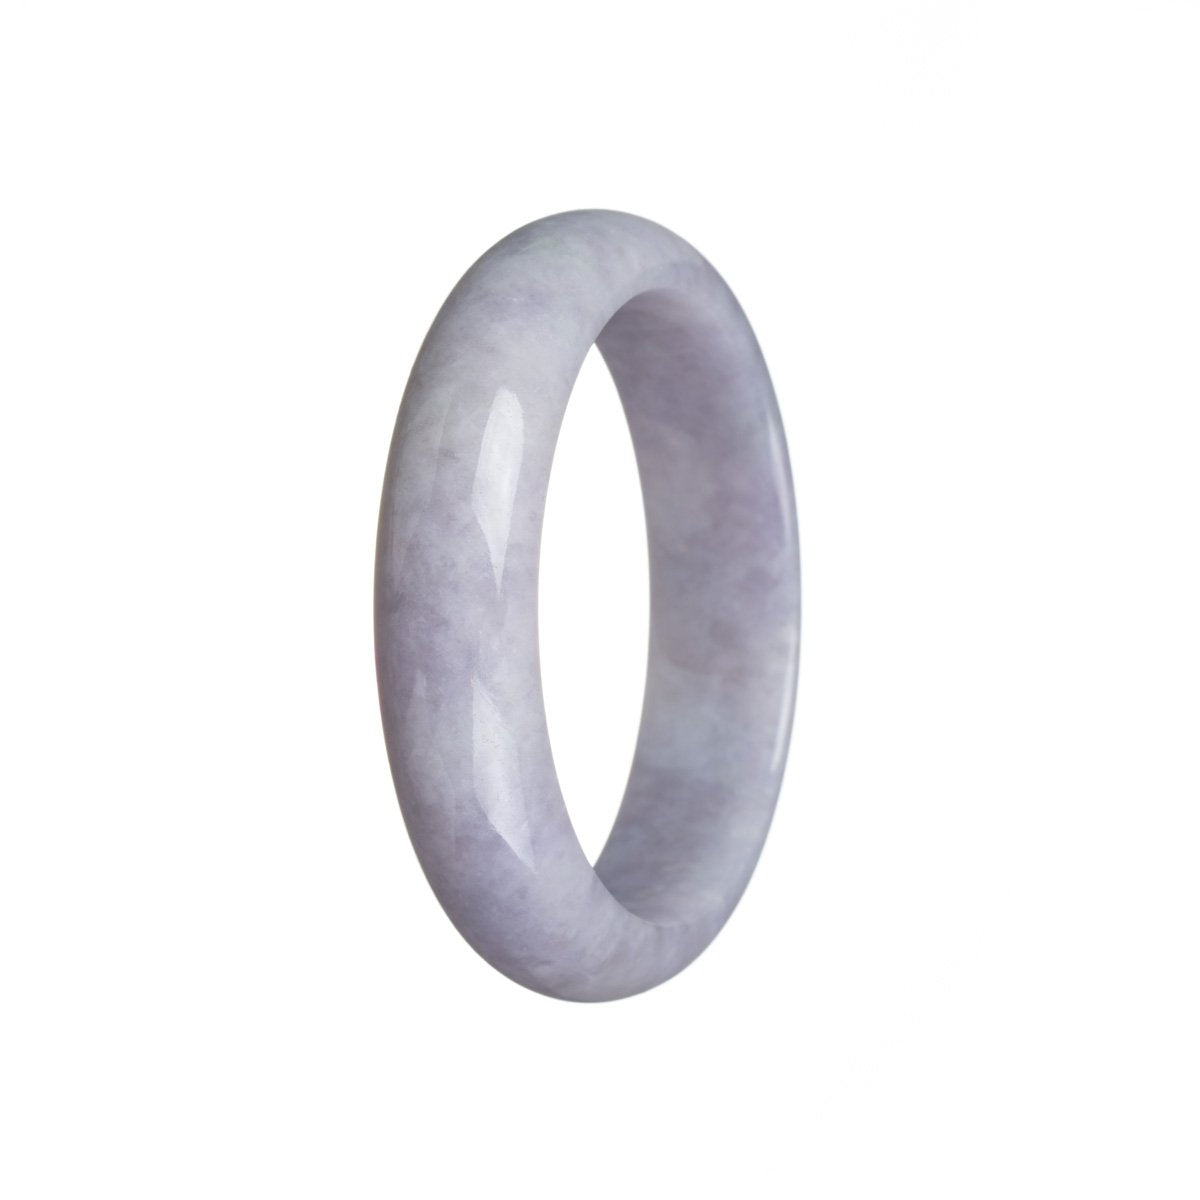 A half moon-shaped jade bracelet made with real untreated lavender jade.